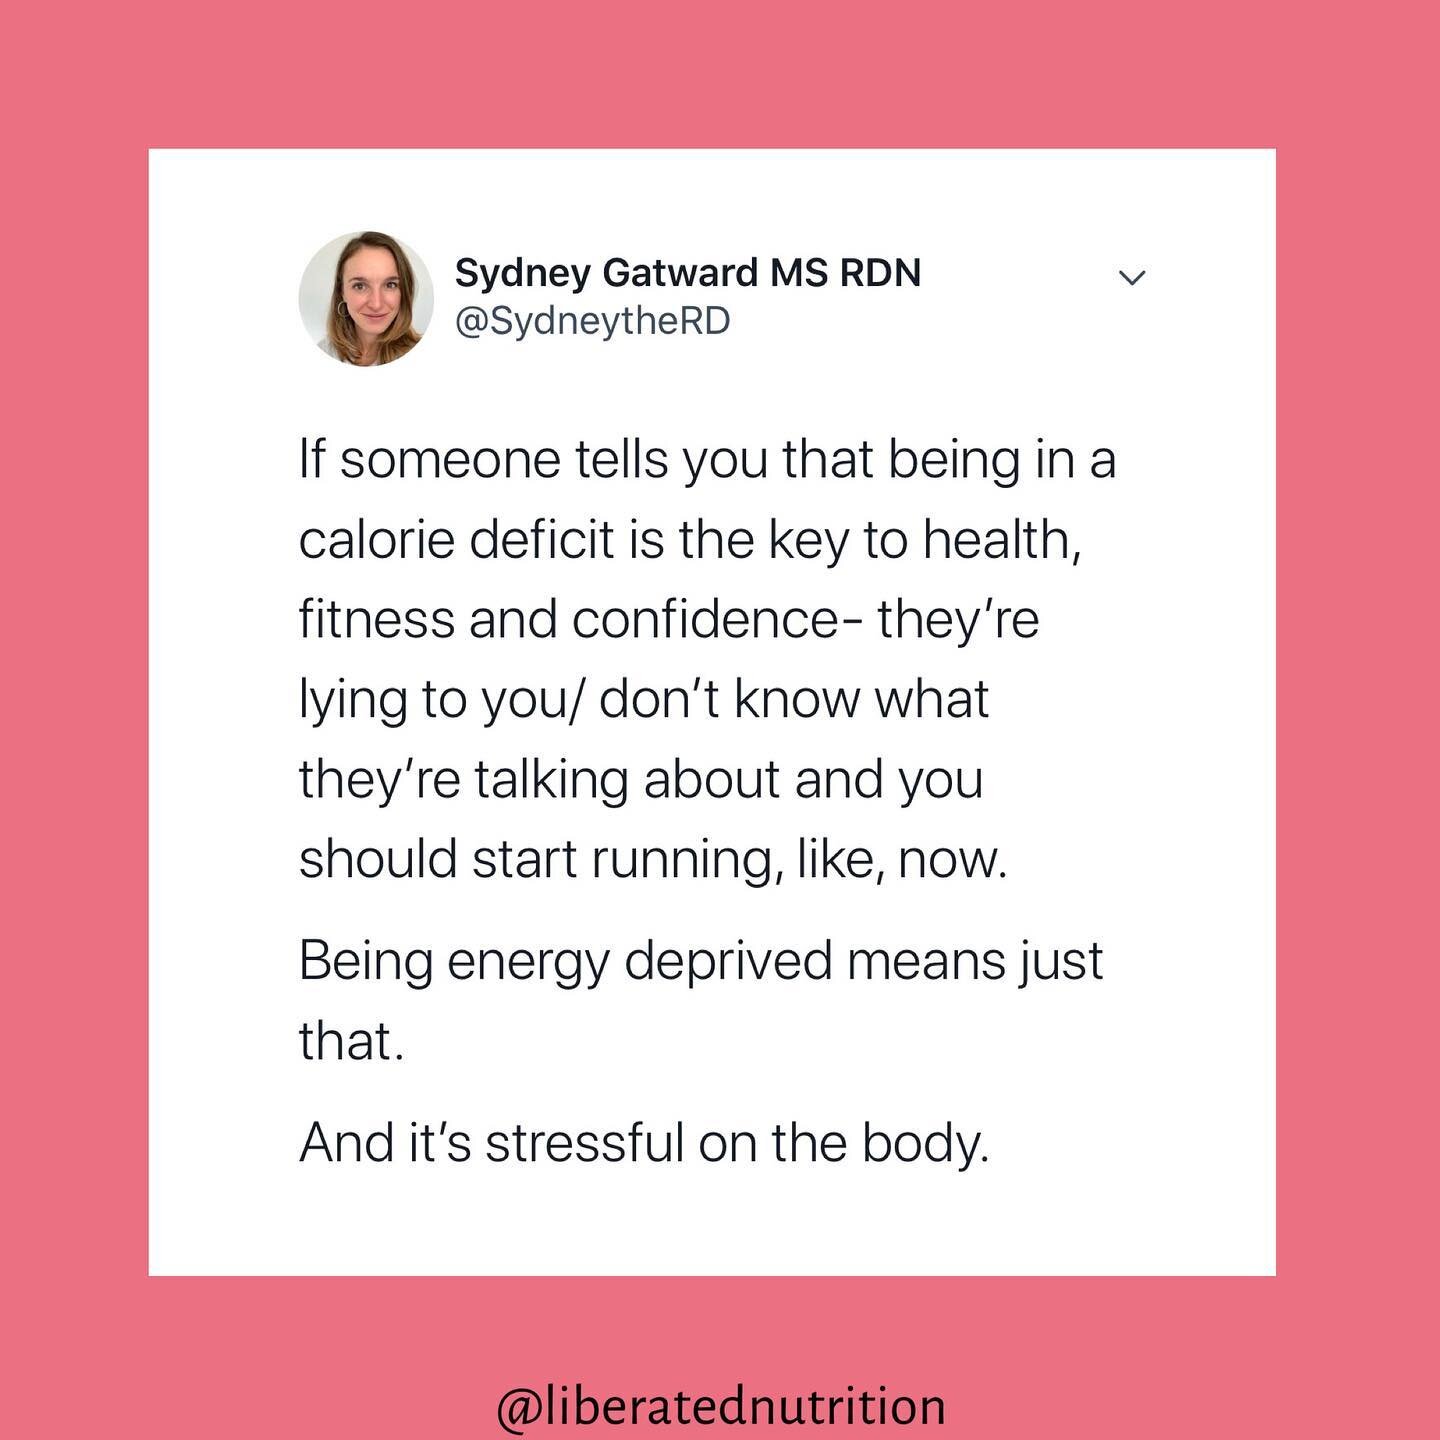 Diet culture is built on a bed of lies. One of those more insidious lies is that being in a calorie deficit is health promoting. It&rsquo;s not. Being chronically underfed is stressful on the body and can actually lead to increased cortisol and infla